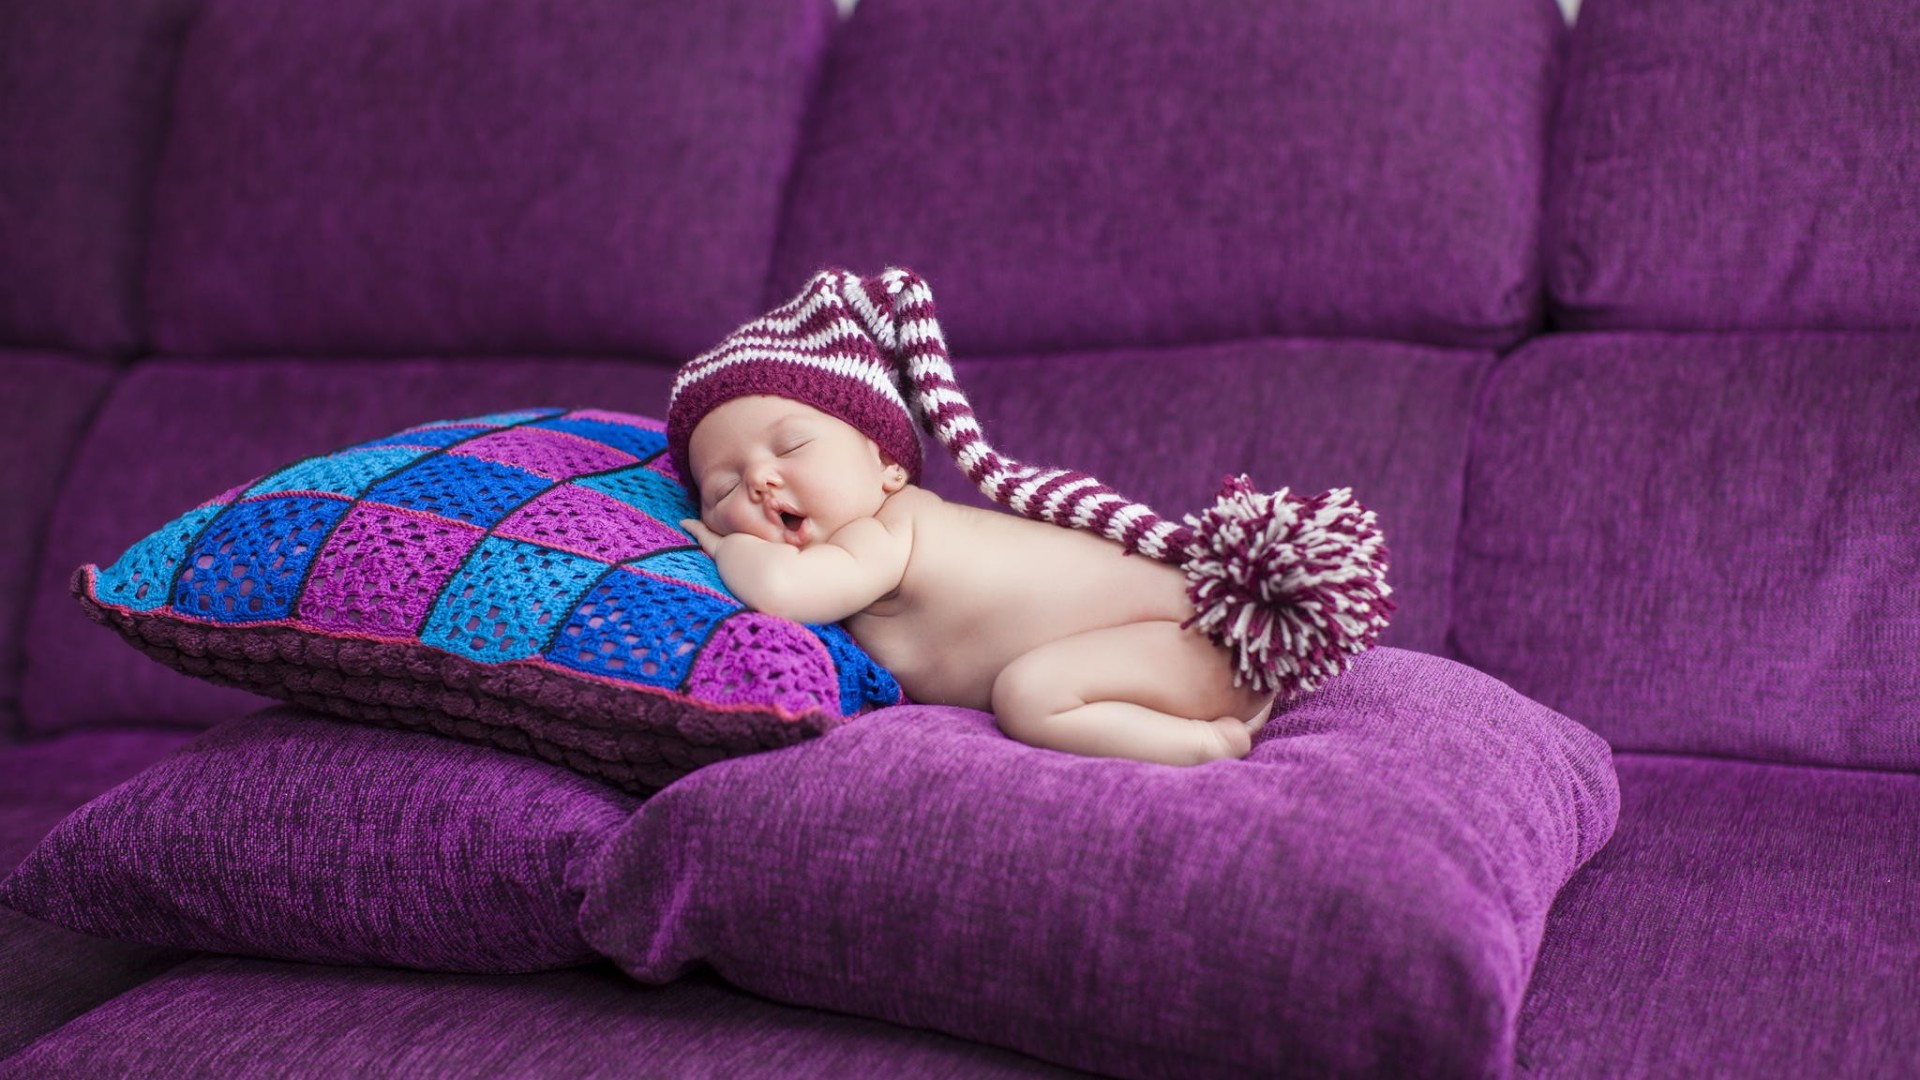 baby wallpaper,purple,violet,child,baby,lilac